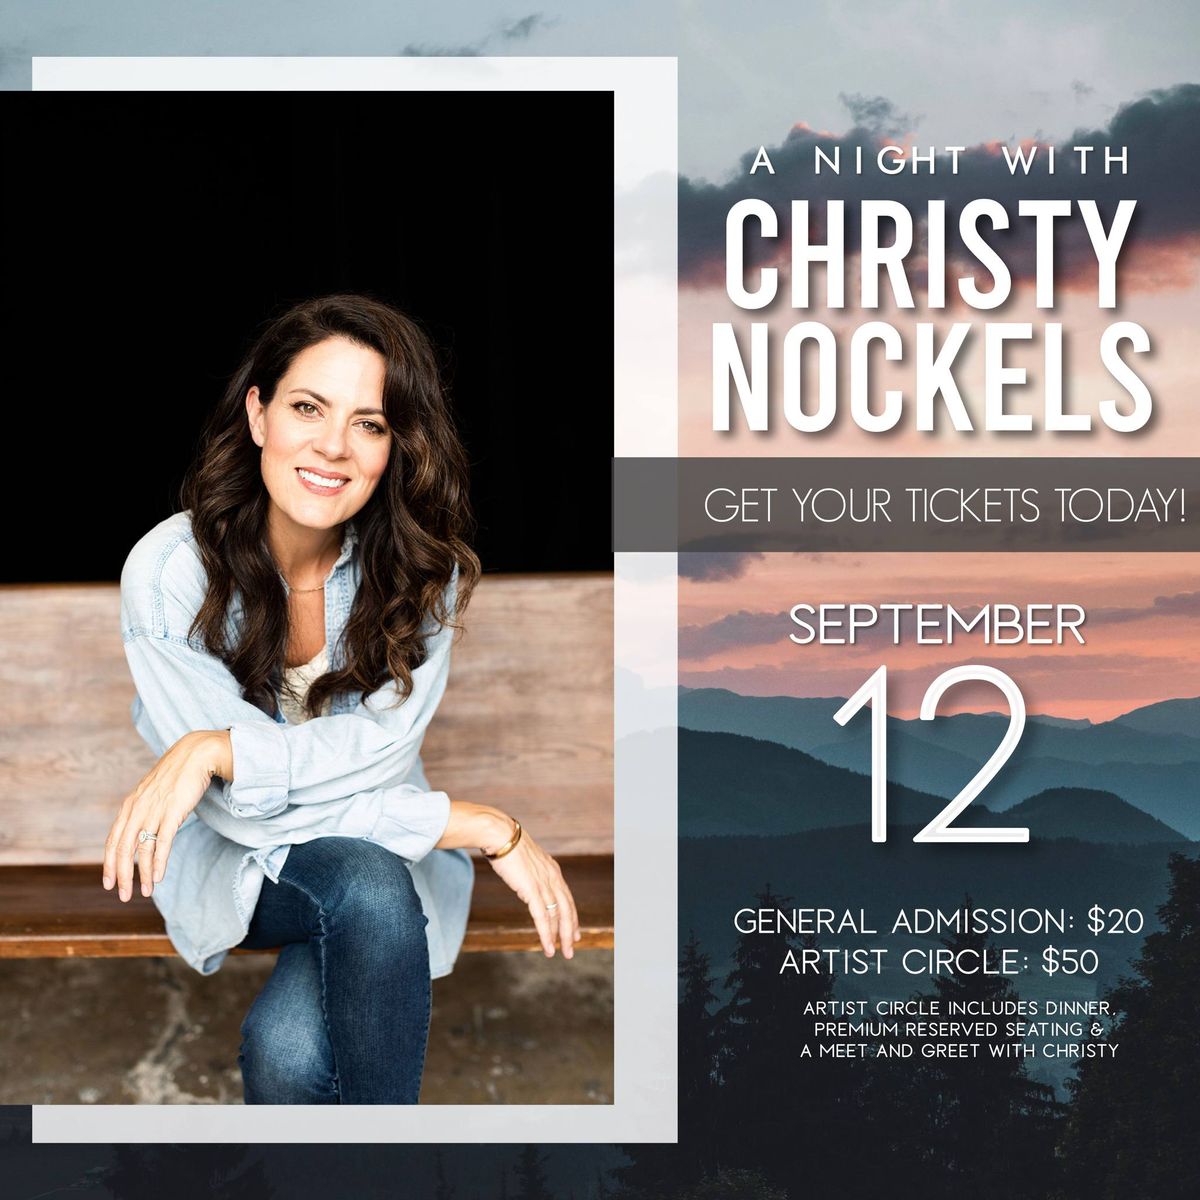 A Night With Christy Nockels